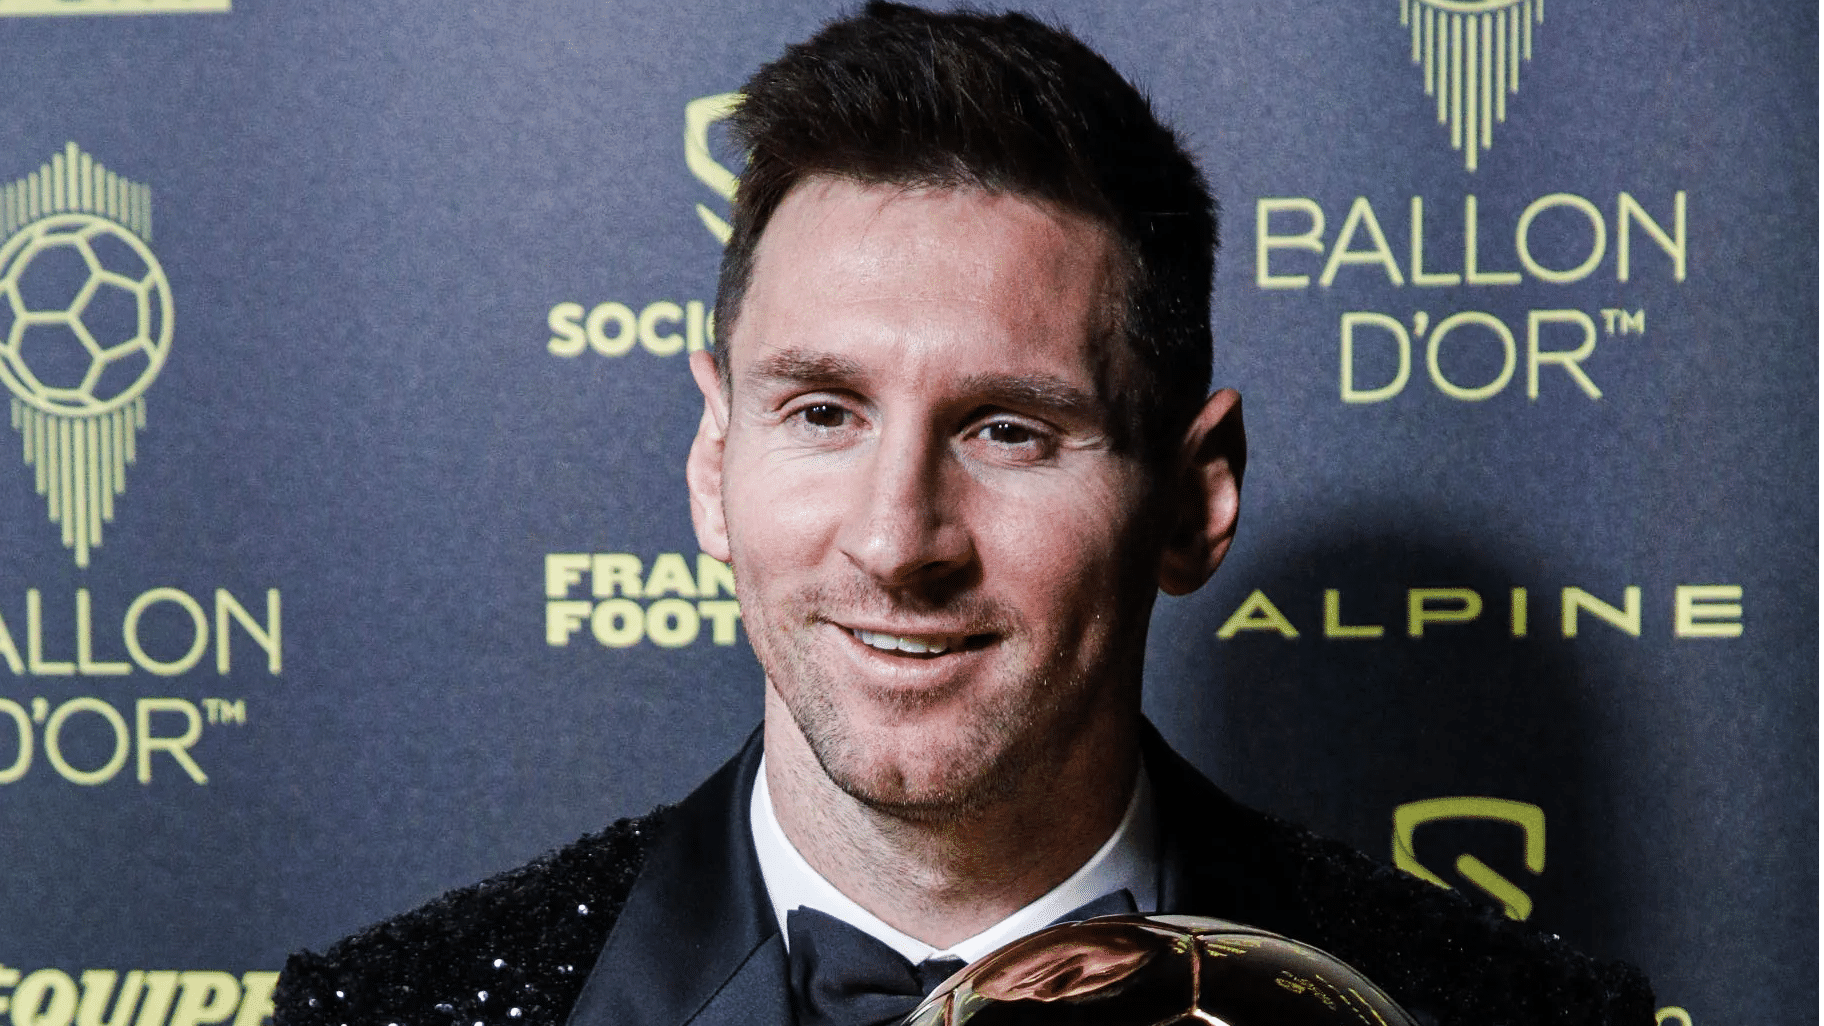 Lionel Messi wins men’s Ballon d’Or 2021, the seventh of his career